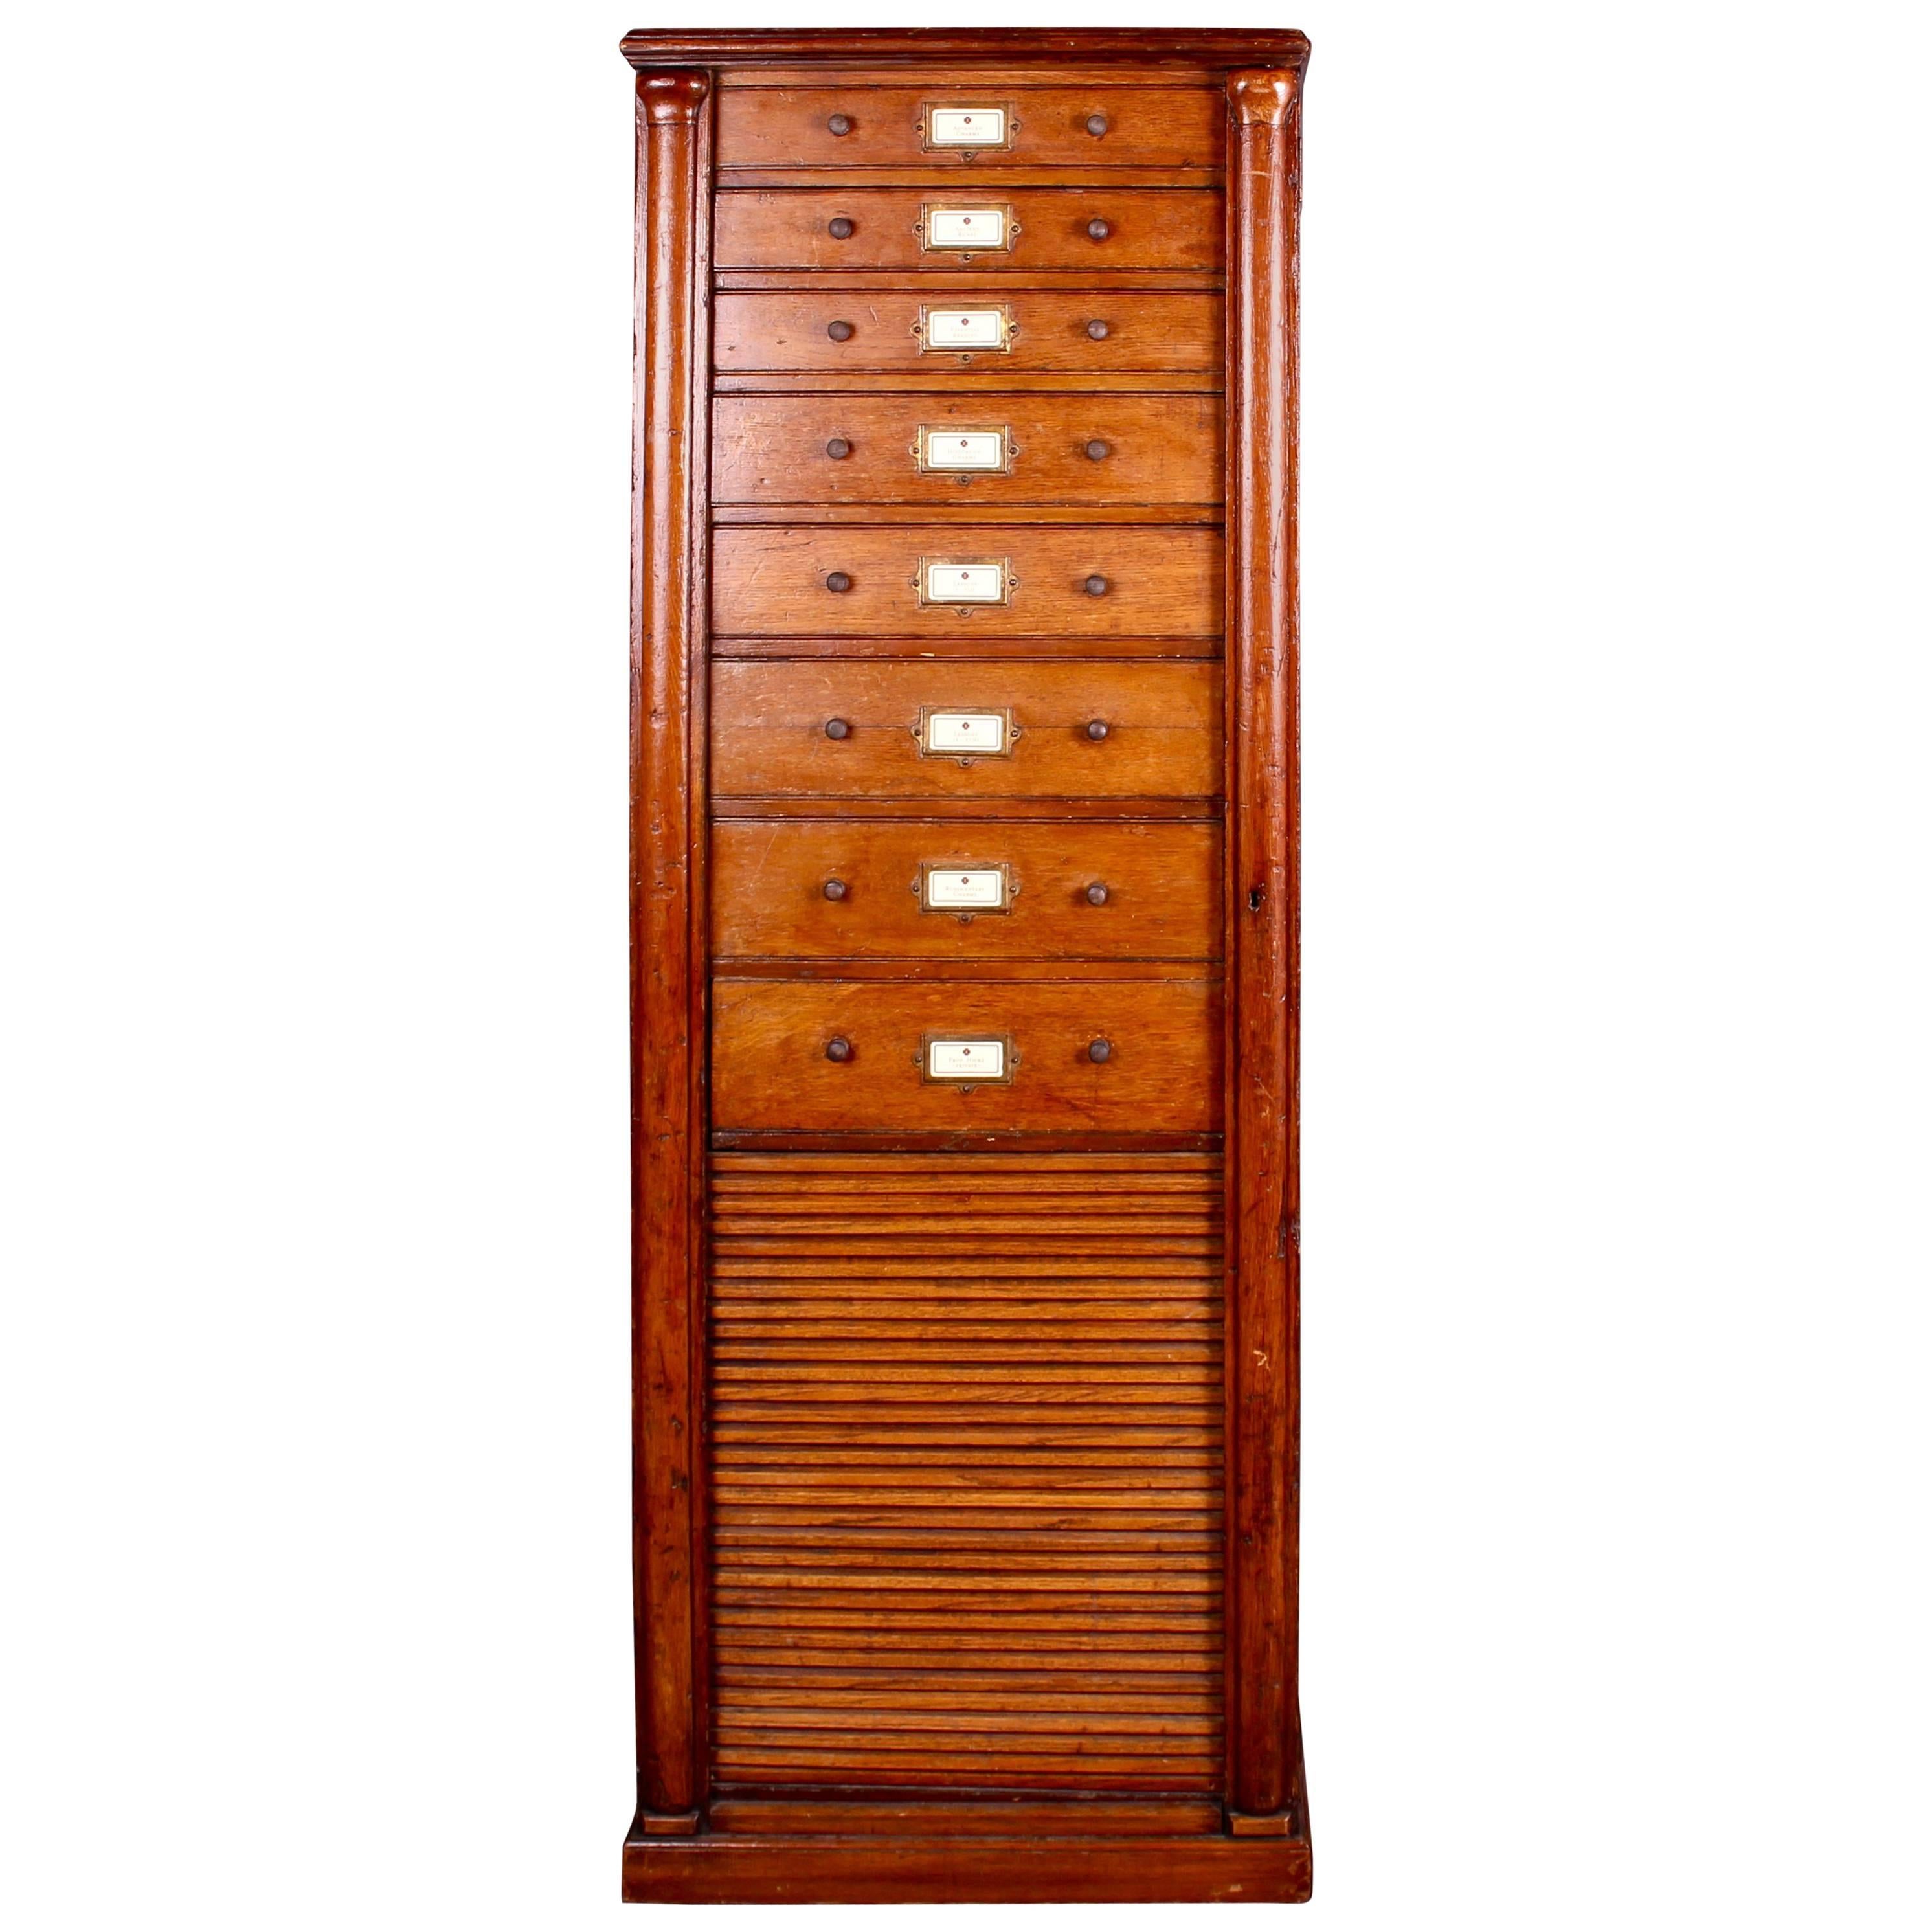 English Oak Filing Cabinet or Chest of Drawers, circa 1910